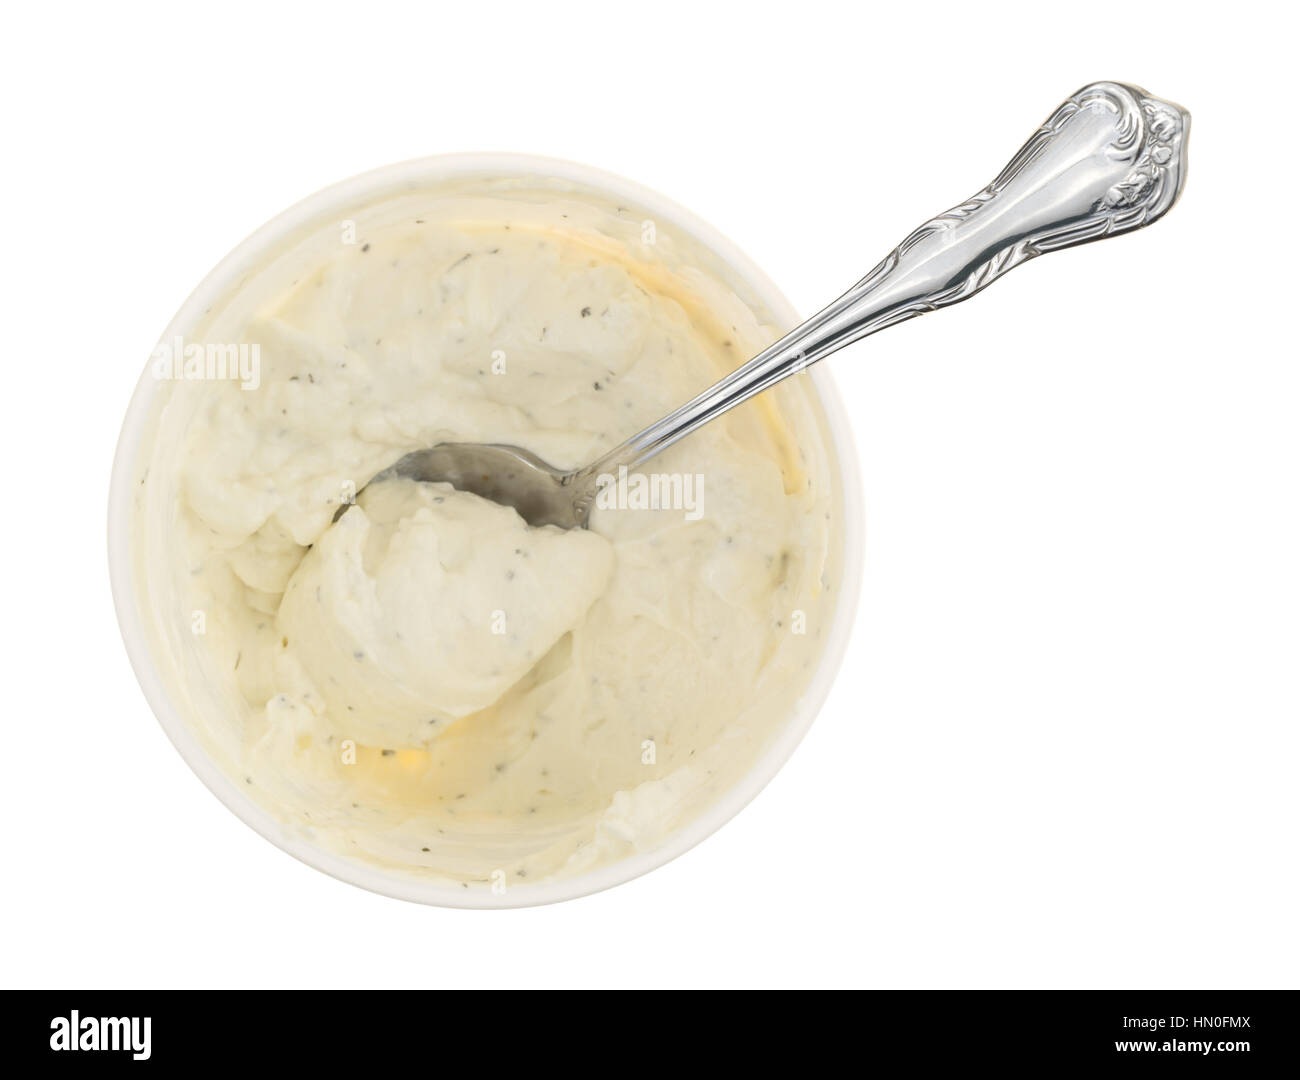 Top view of a container of fresh French onion dip with a spoon inserted into the food isolated on a white background. Stock Photo